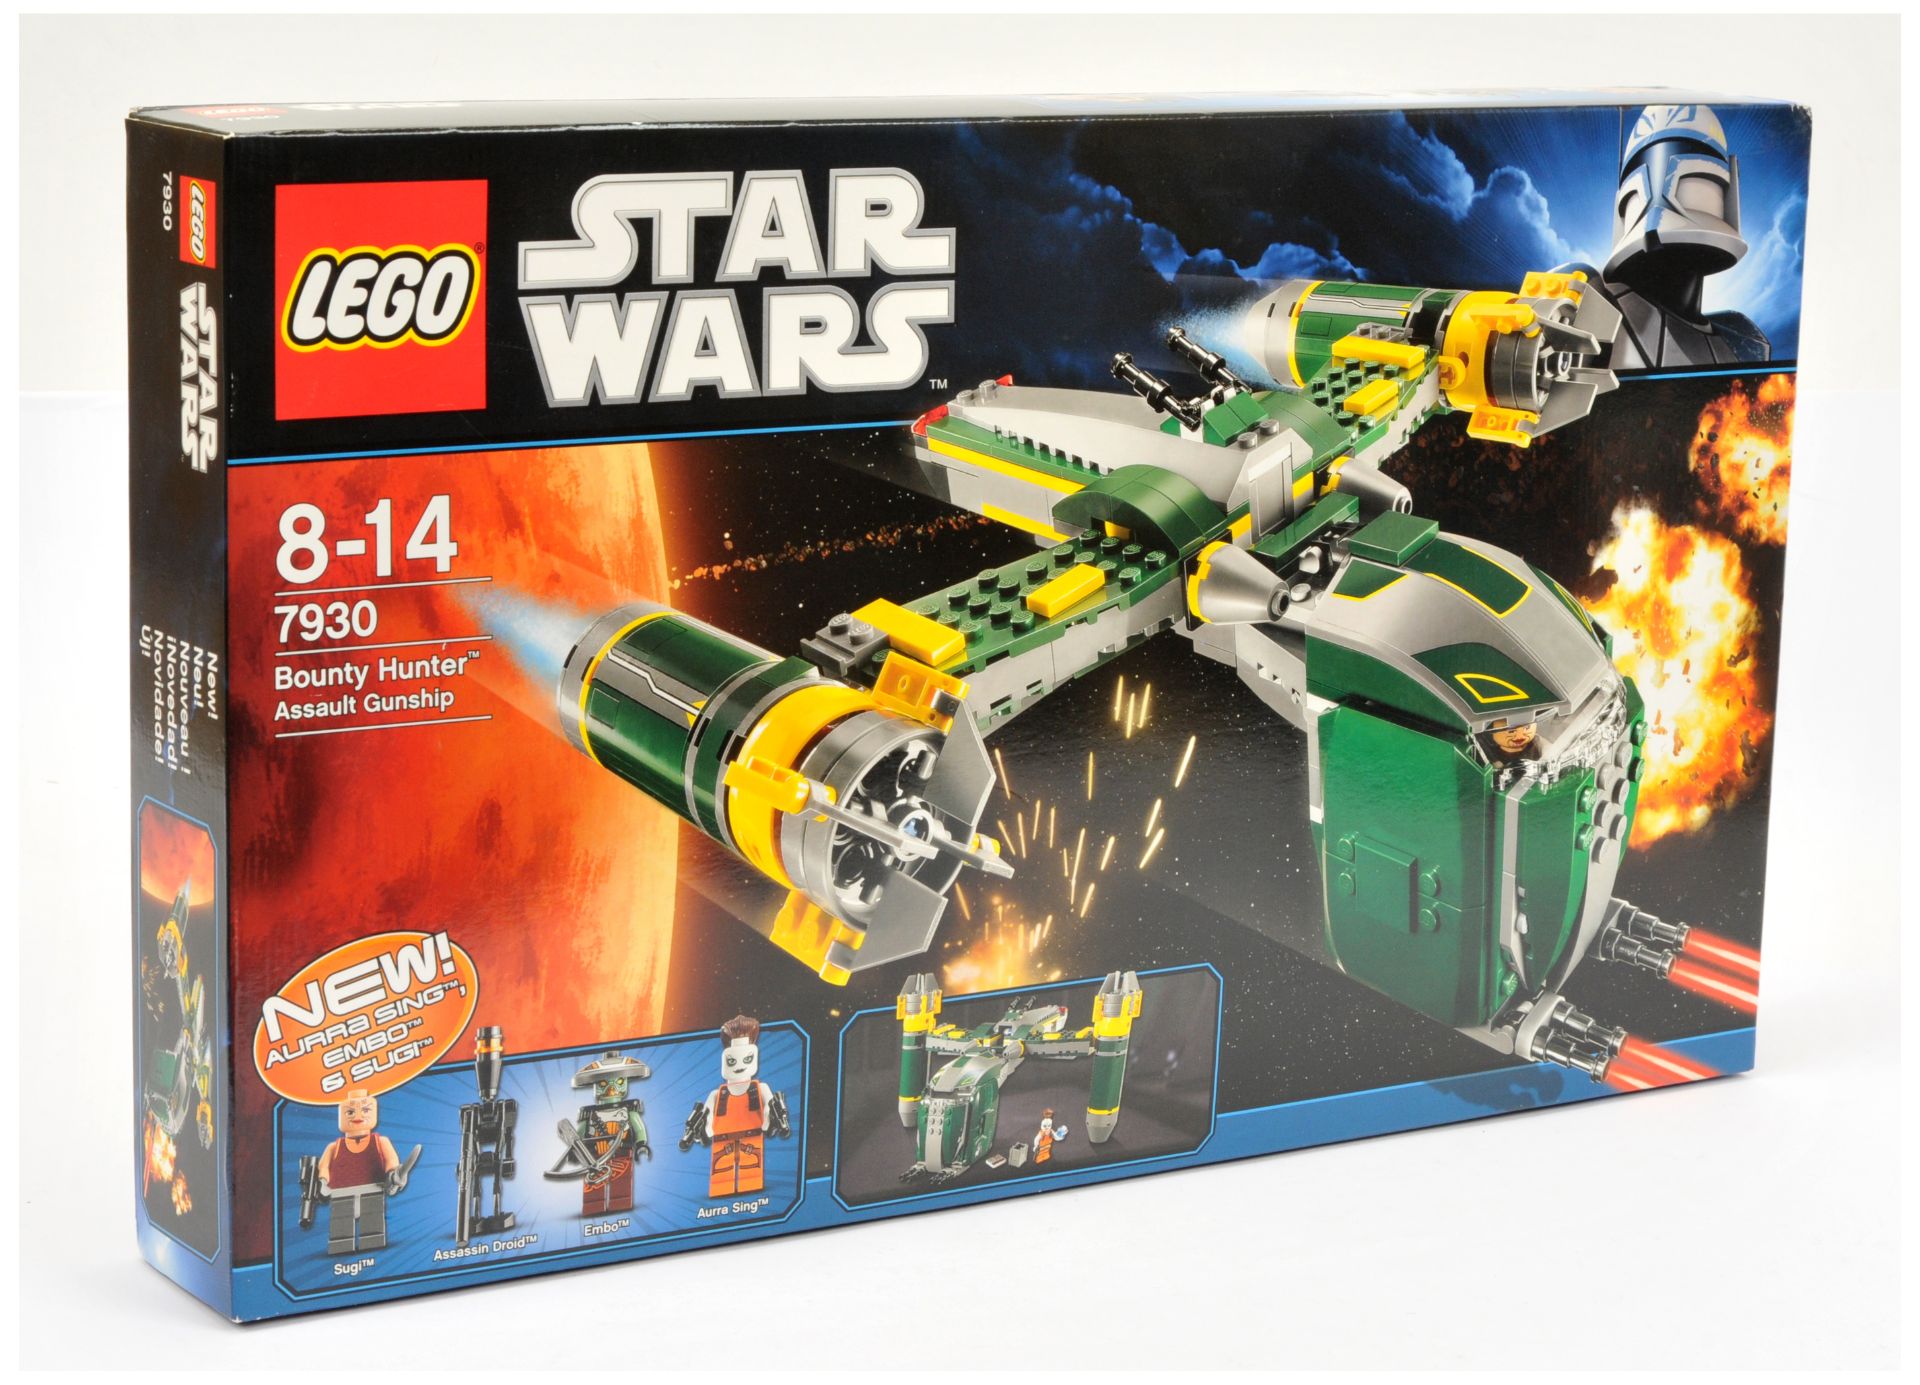 Lego Star Wars 7930 Bounty Hunter Assault Gunship, within Excellent Plus Sealed packaging. (the p...